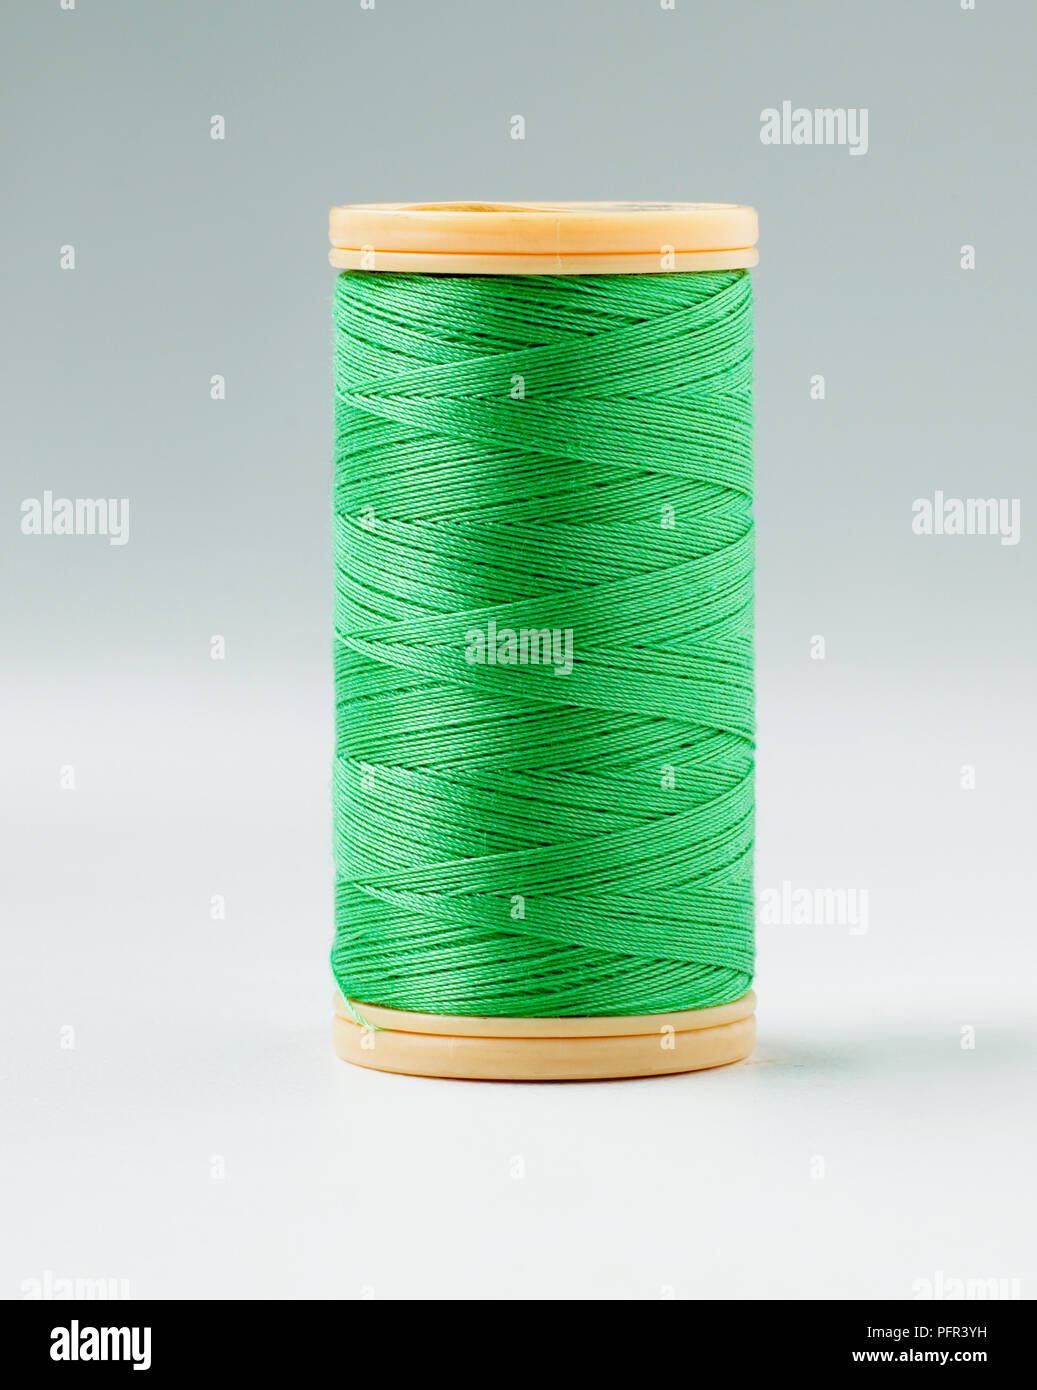 Reel of green cotton sewing thread Stock Photo